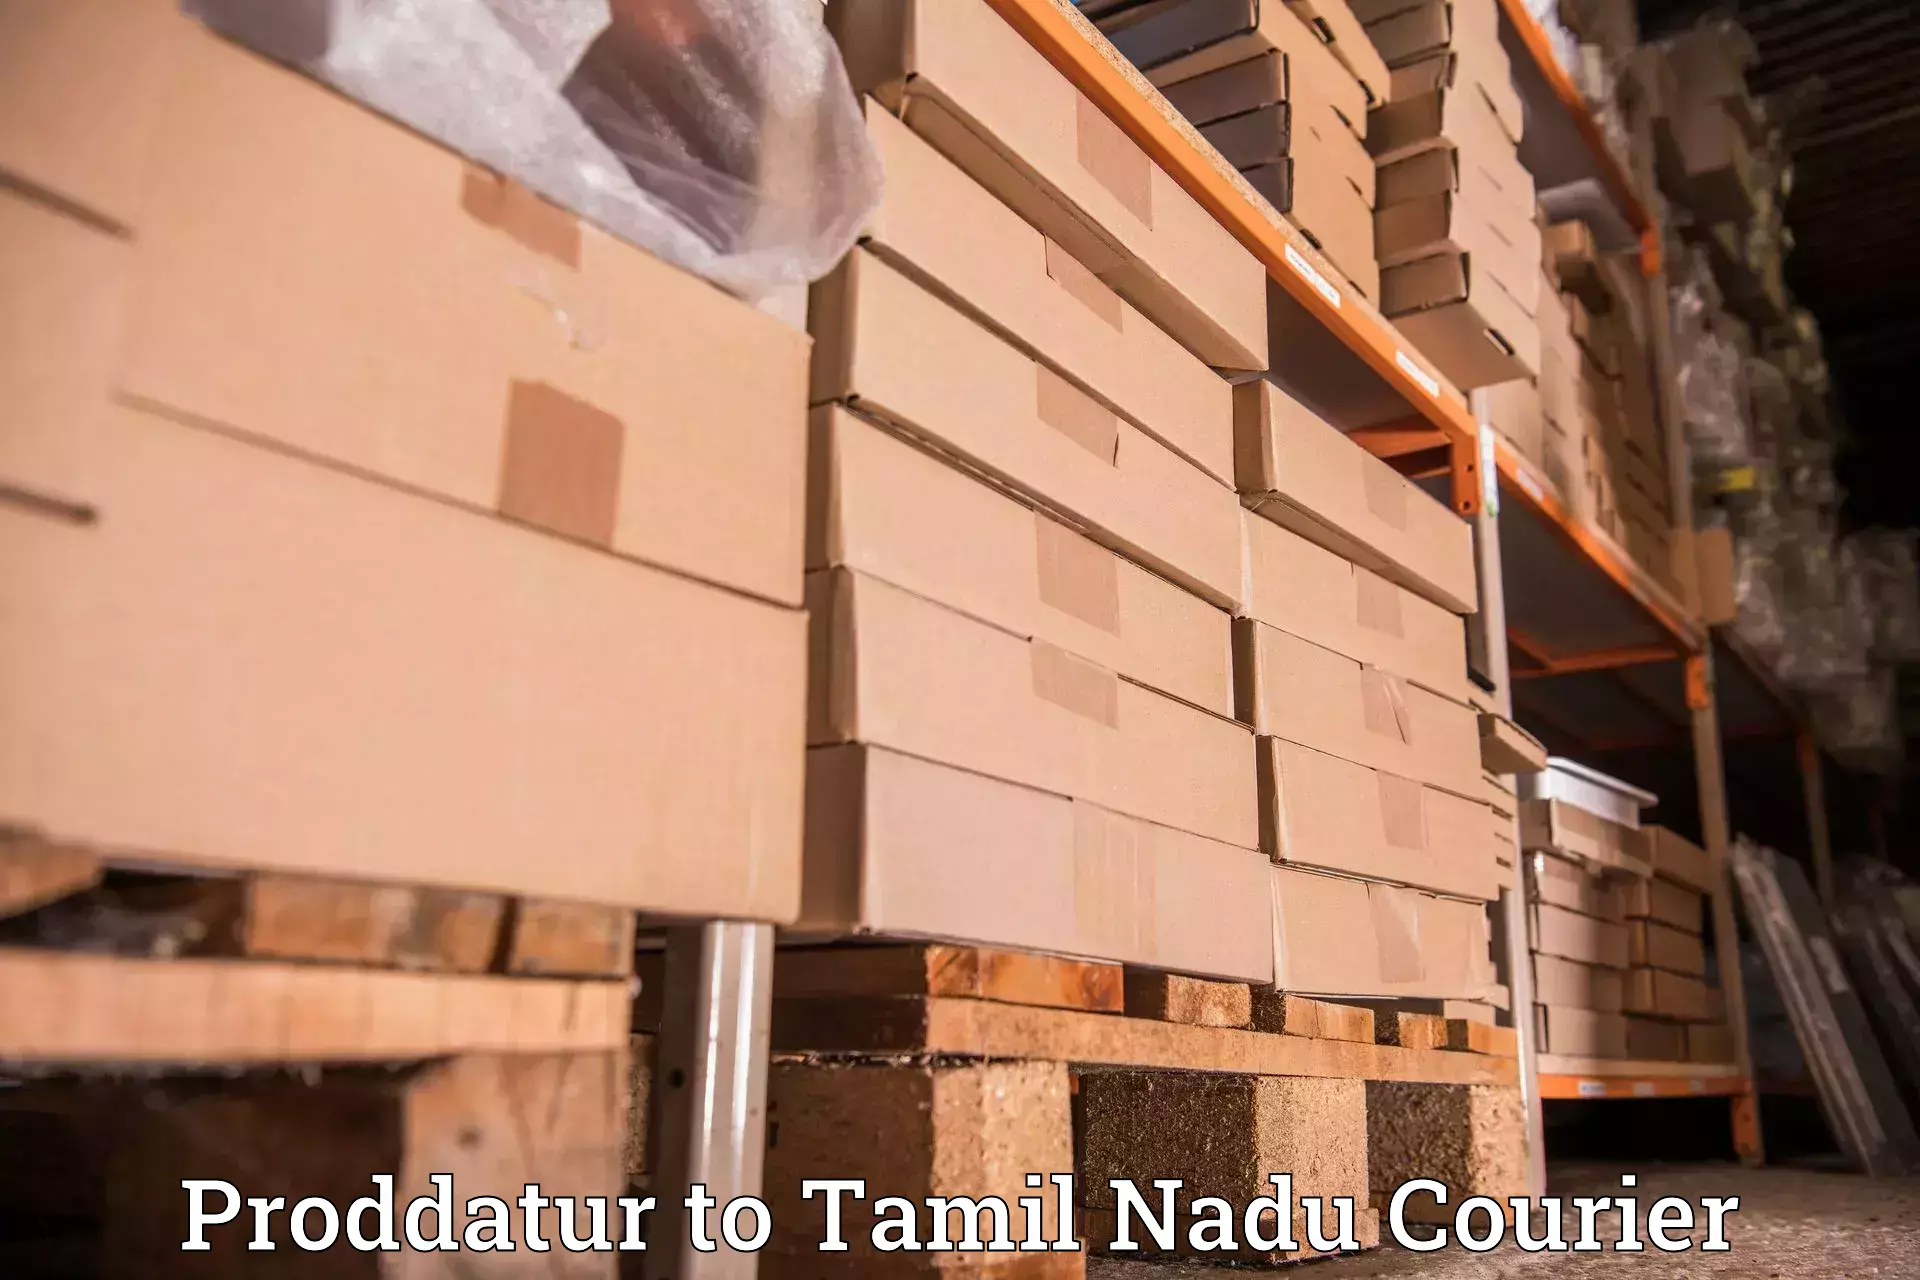 Next-day delivery options Proddatur to Valparai